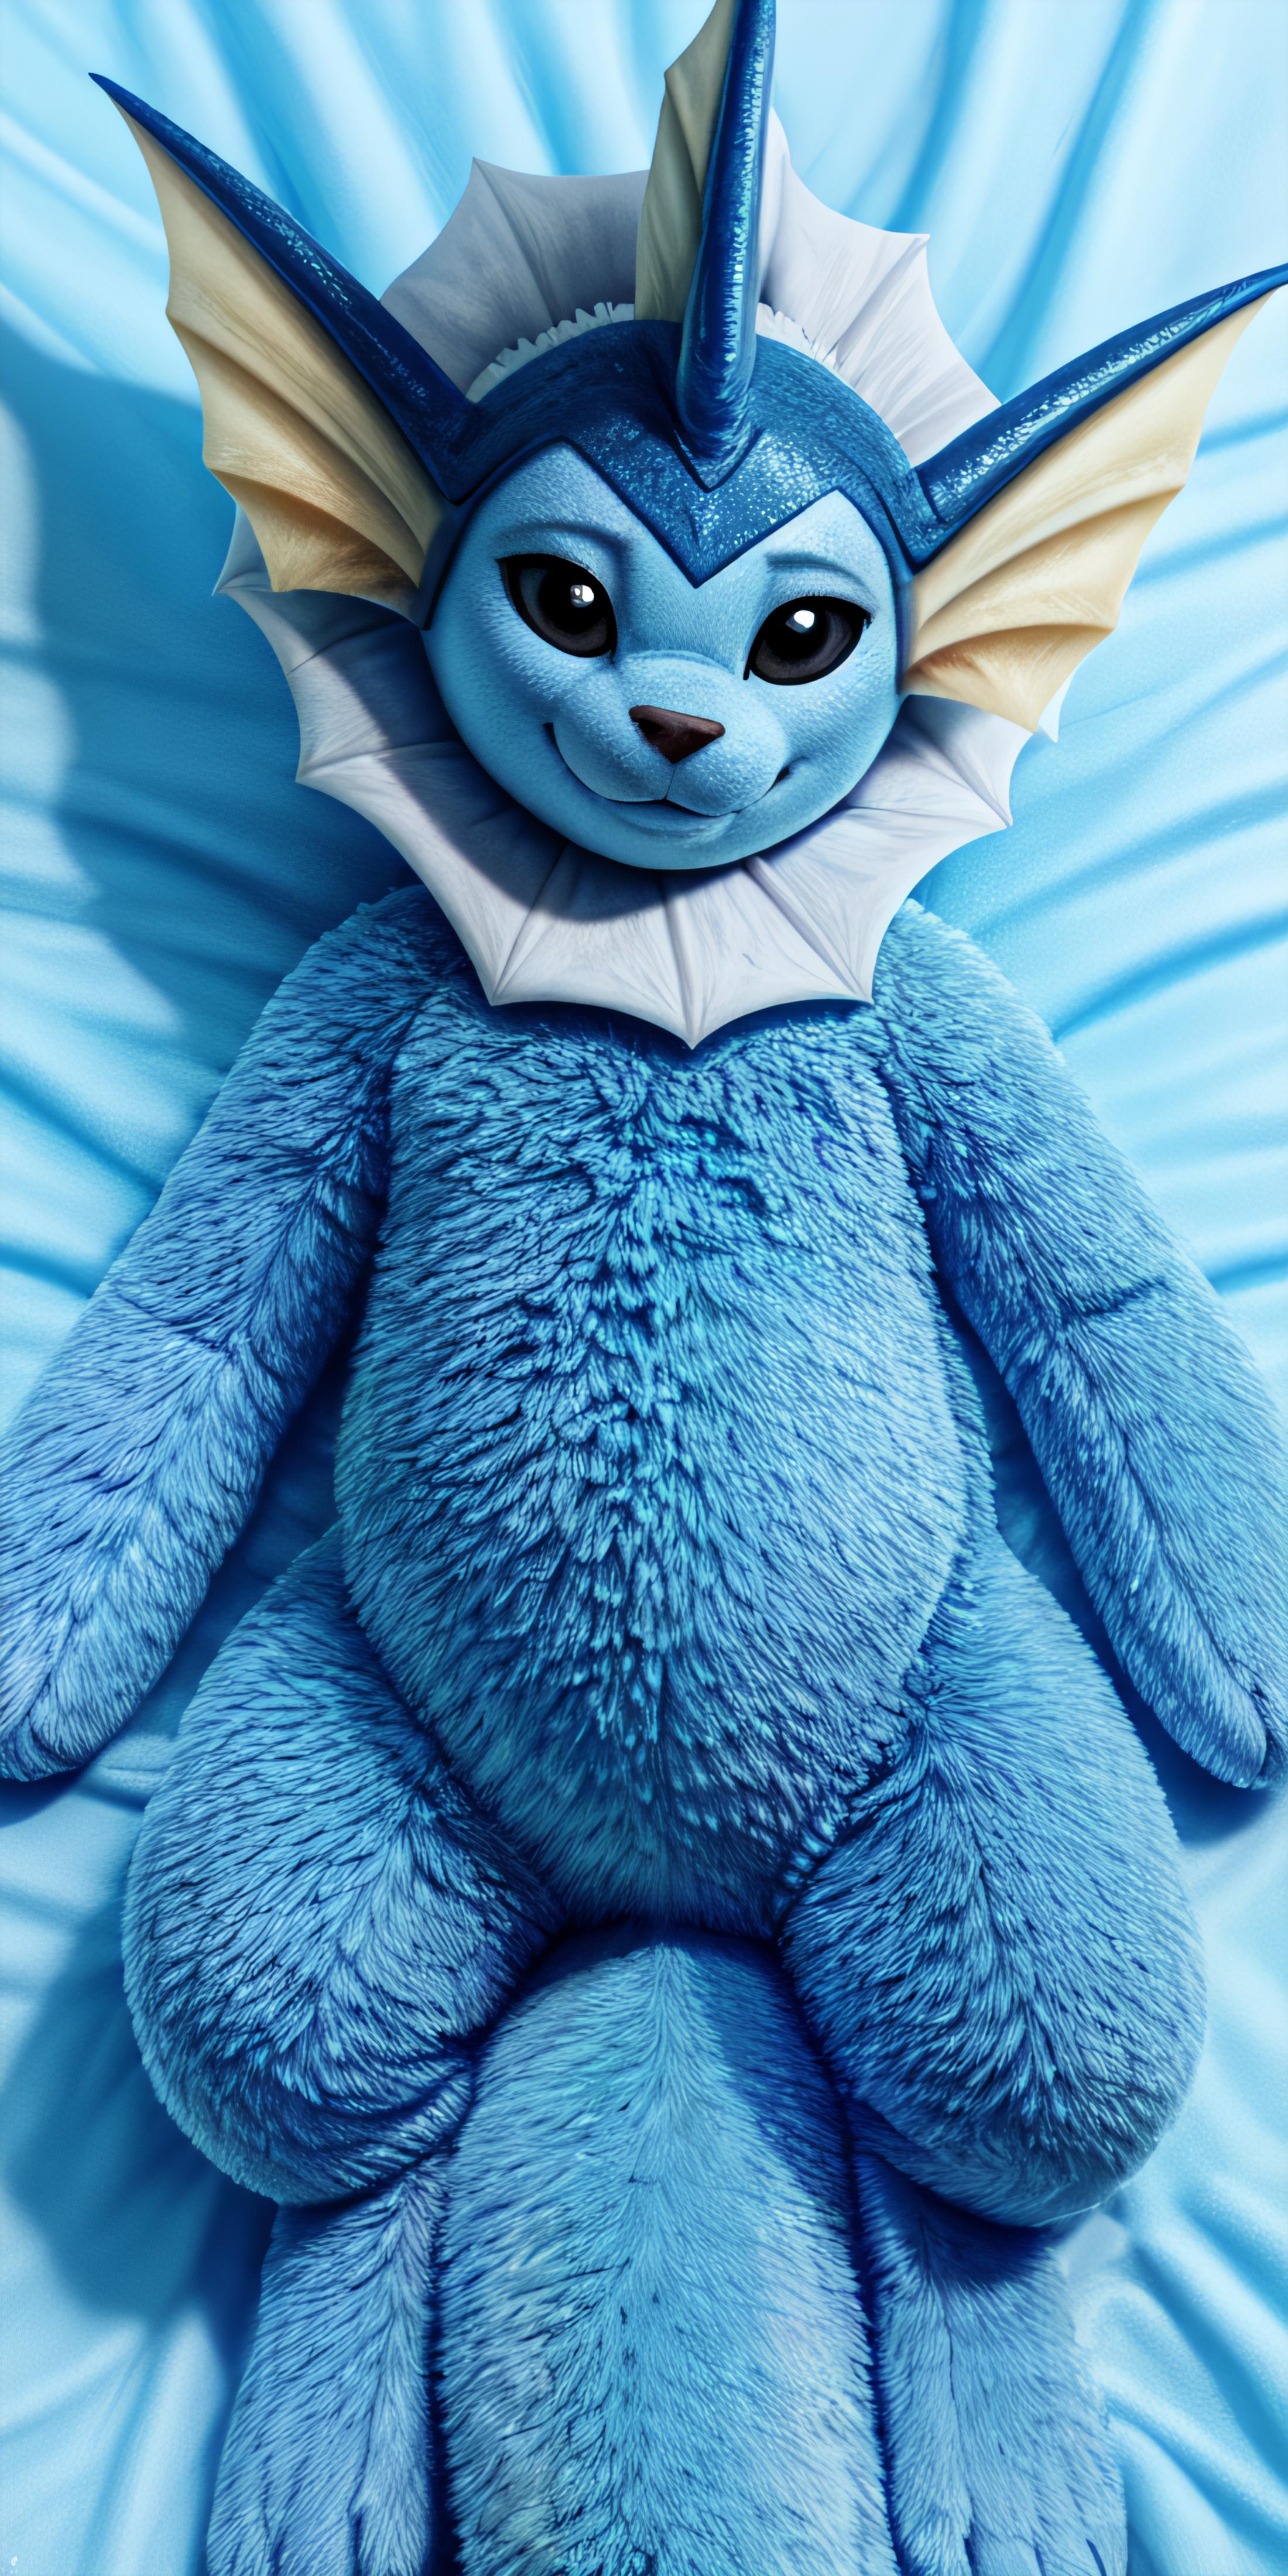 A large blue teddy bear with a white collar and a blue sheet background.